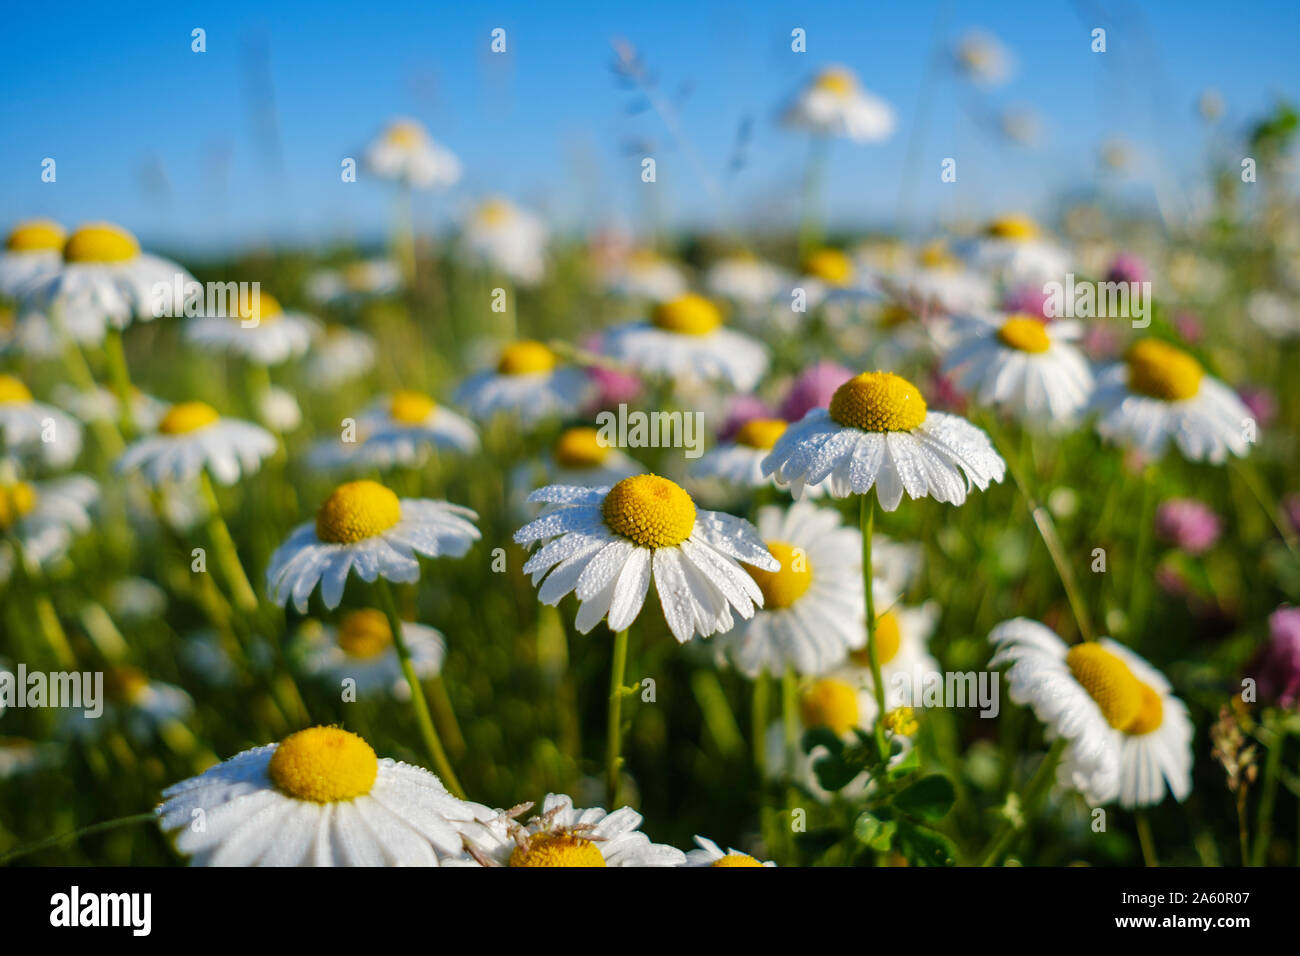 Close-up of wet white daisies blooming outdoors, Bavaria, Germany Stock Photo